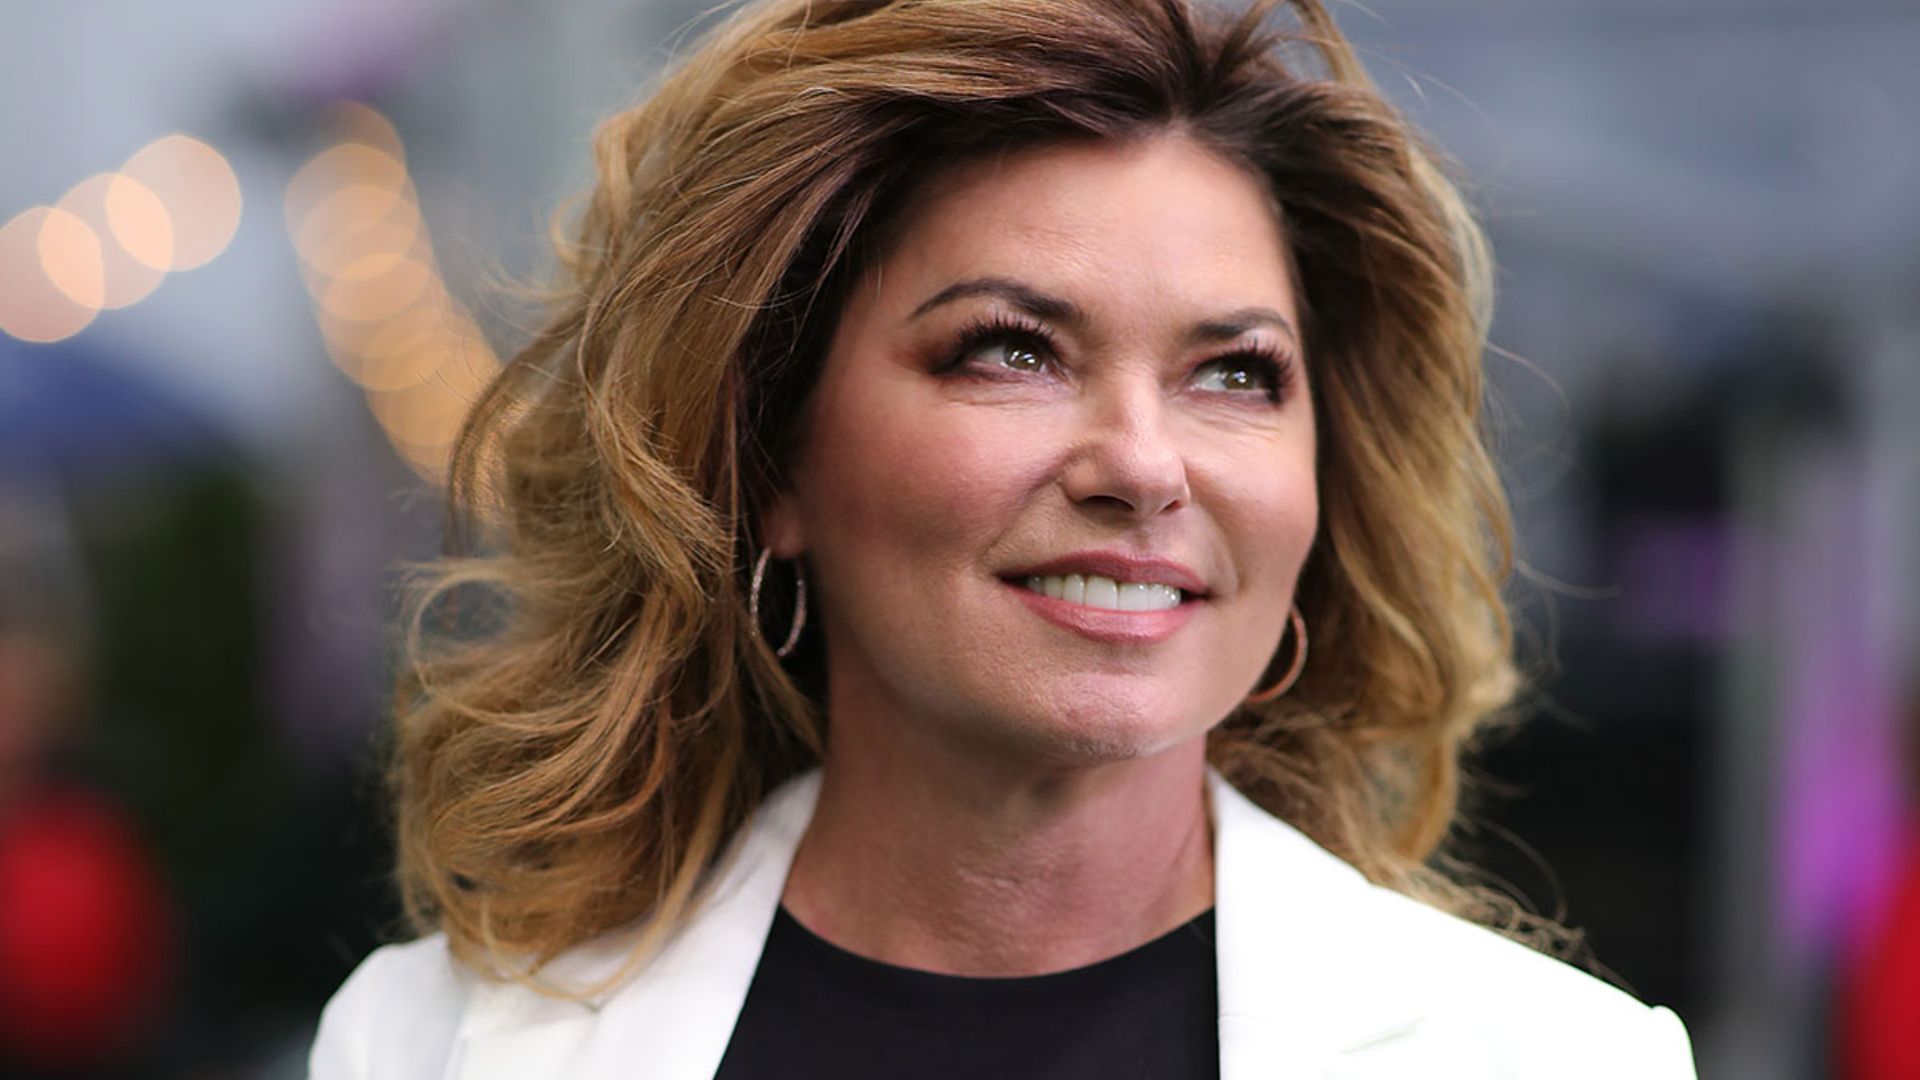 Shania Twain stuns fans with low-key appearance in cozy Christmas photo